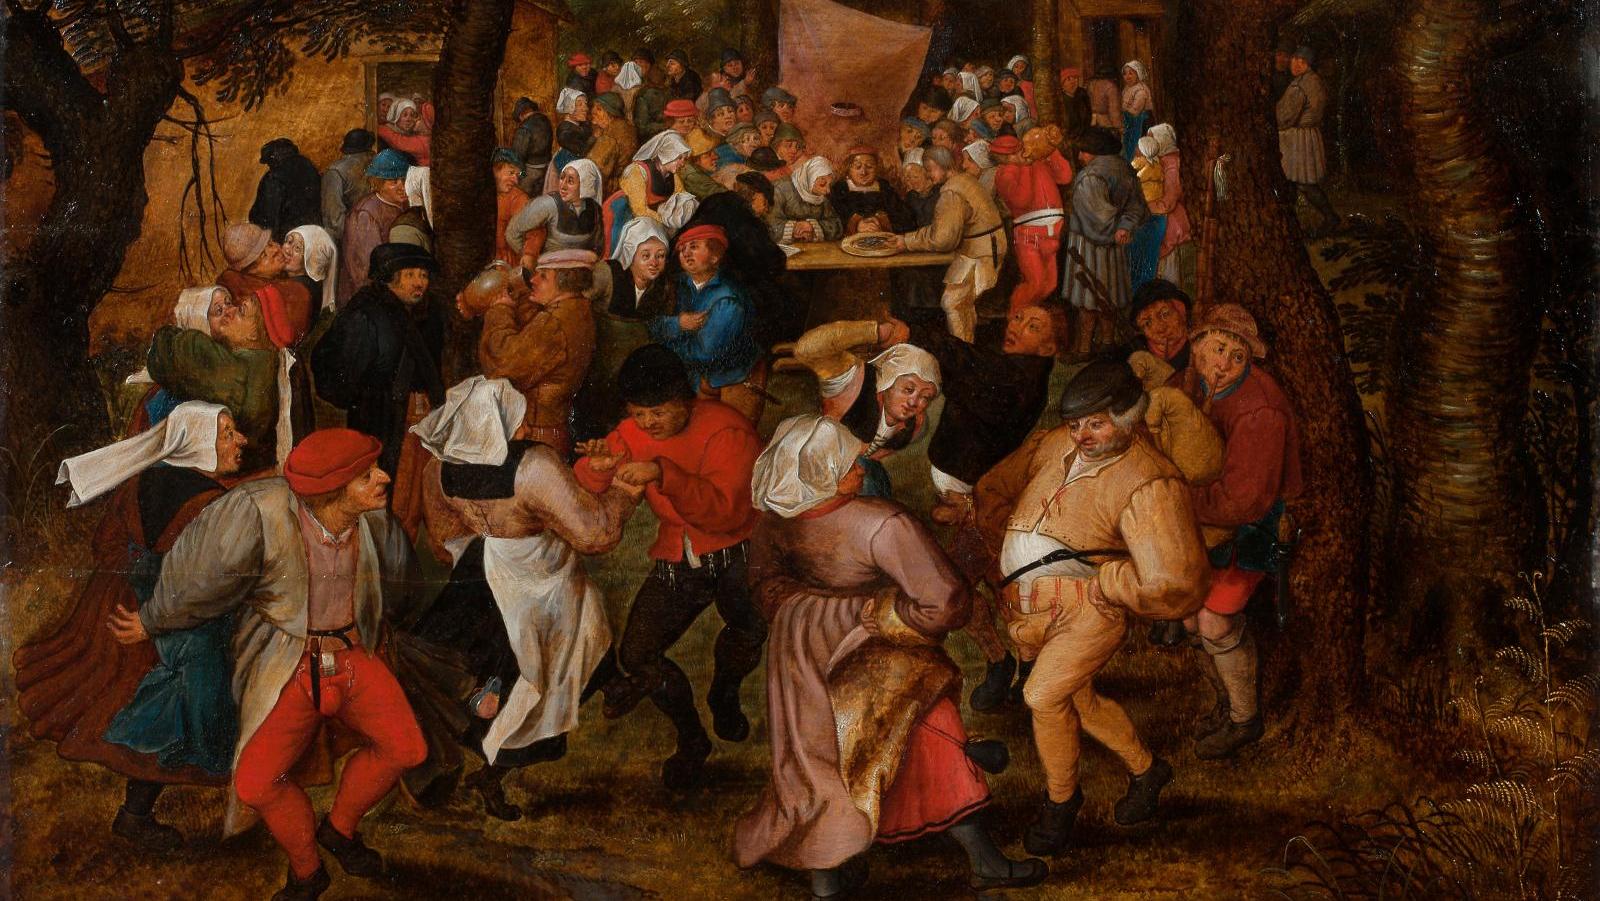 Pieter II Bruegel, aka the Younger (1564-1638), Les Noces Villageoises (Wedding dance... Bruegel at a Whirling Pace